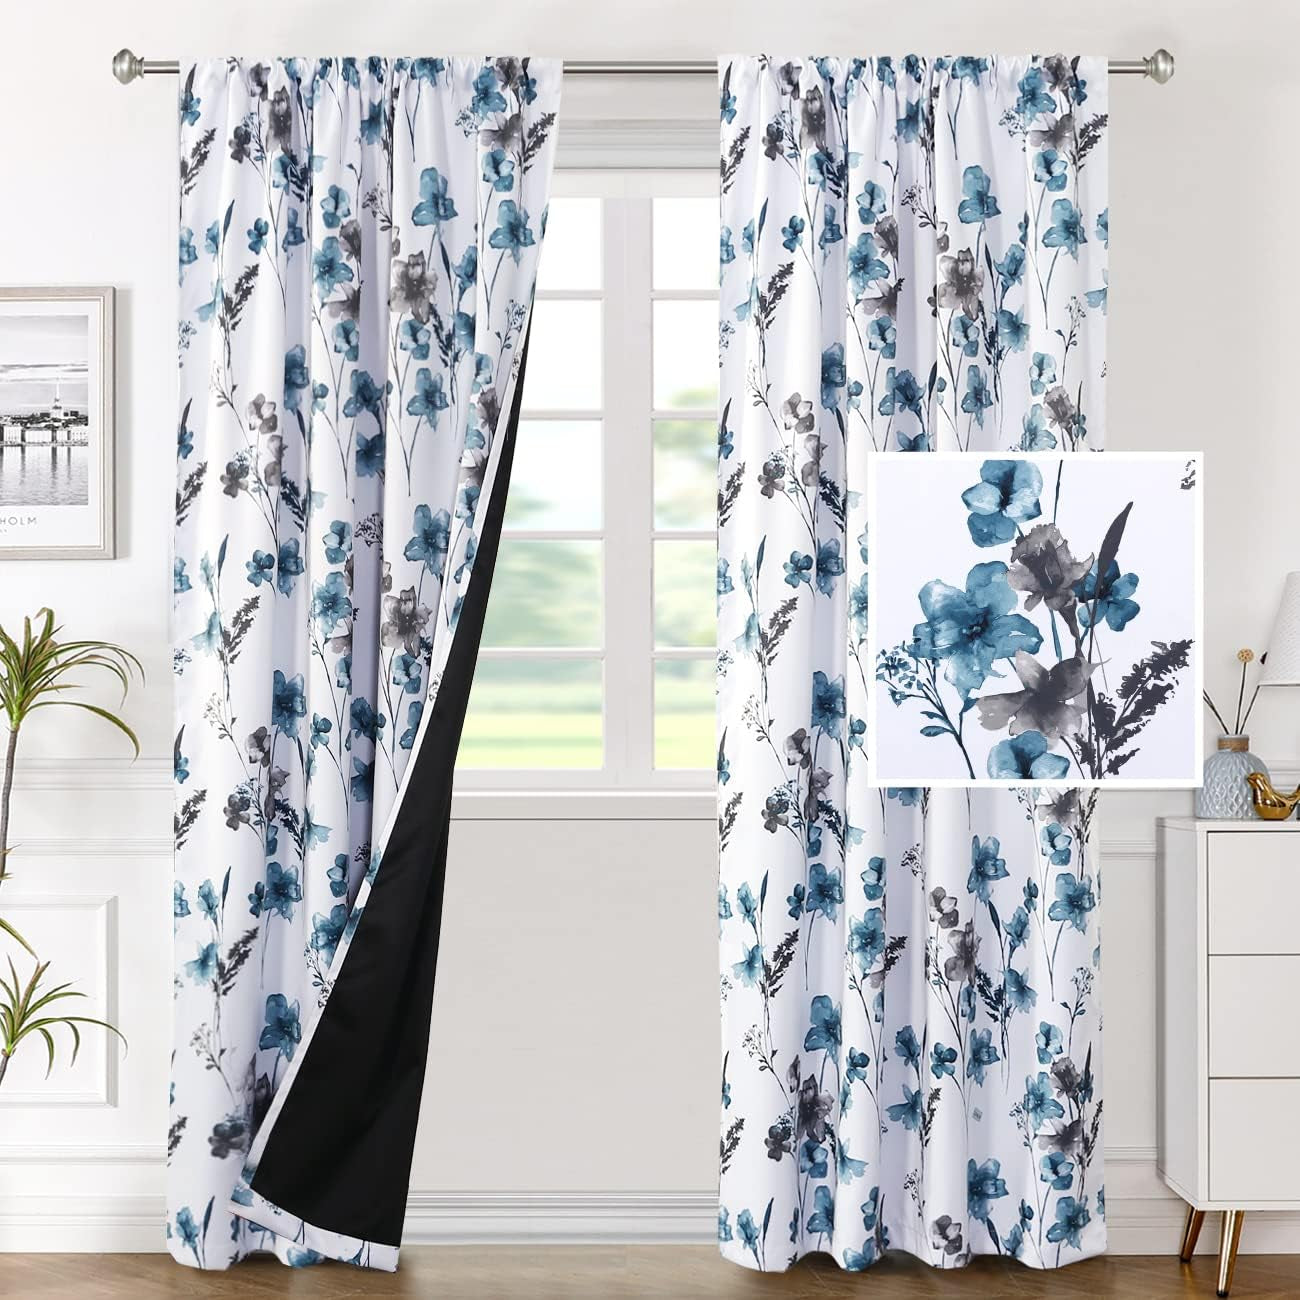 H.VERSAILTEX 100% Blackout Curtains for Bedroom Cattleya Floral Printed Drapes 84 Inches Long Leah Floral Pattern Full Light Blocking Drapes with Black Liner Rod Pocket 2 Panels, Navy/Taupe  H.VERSAILTEX Grey/Blue 52"W X 84"L 